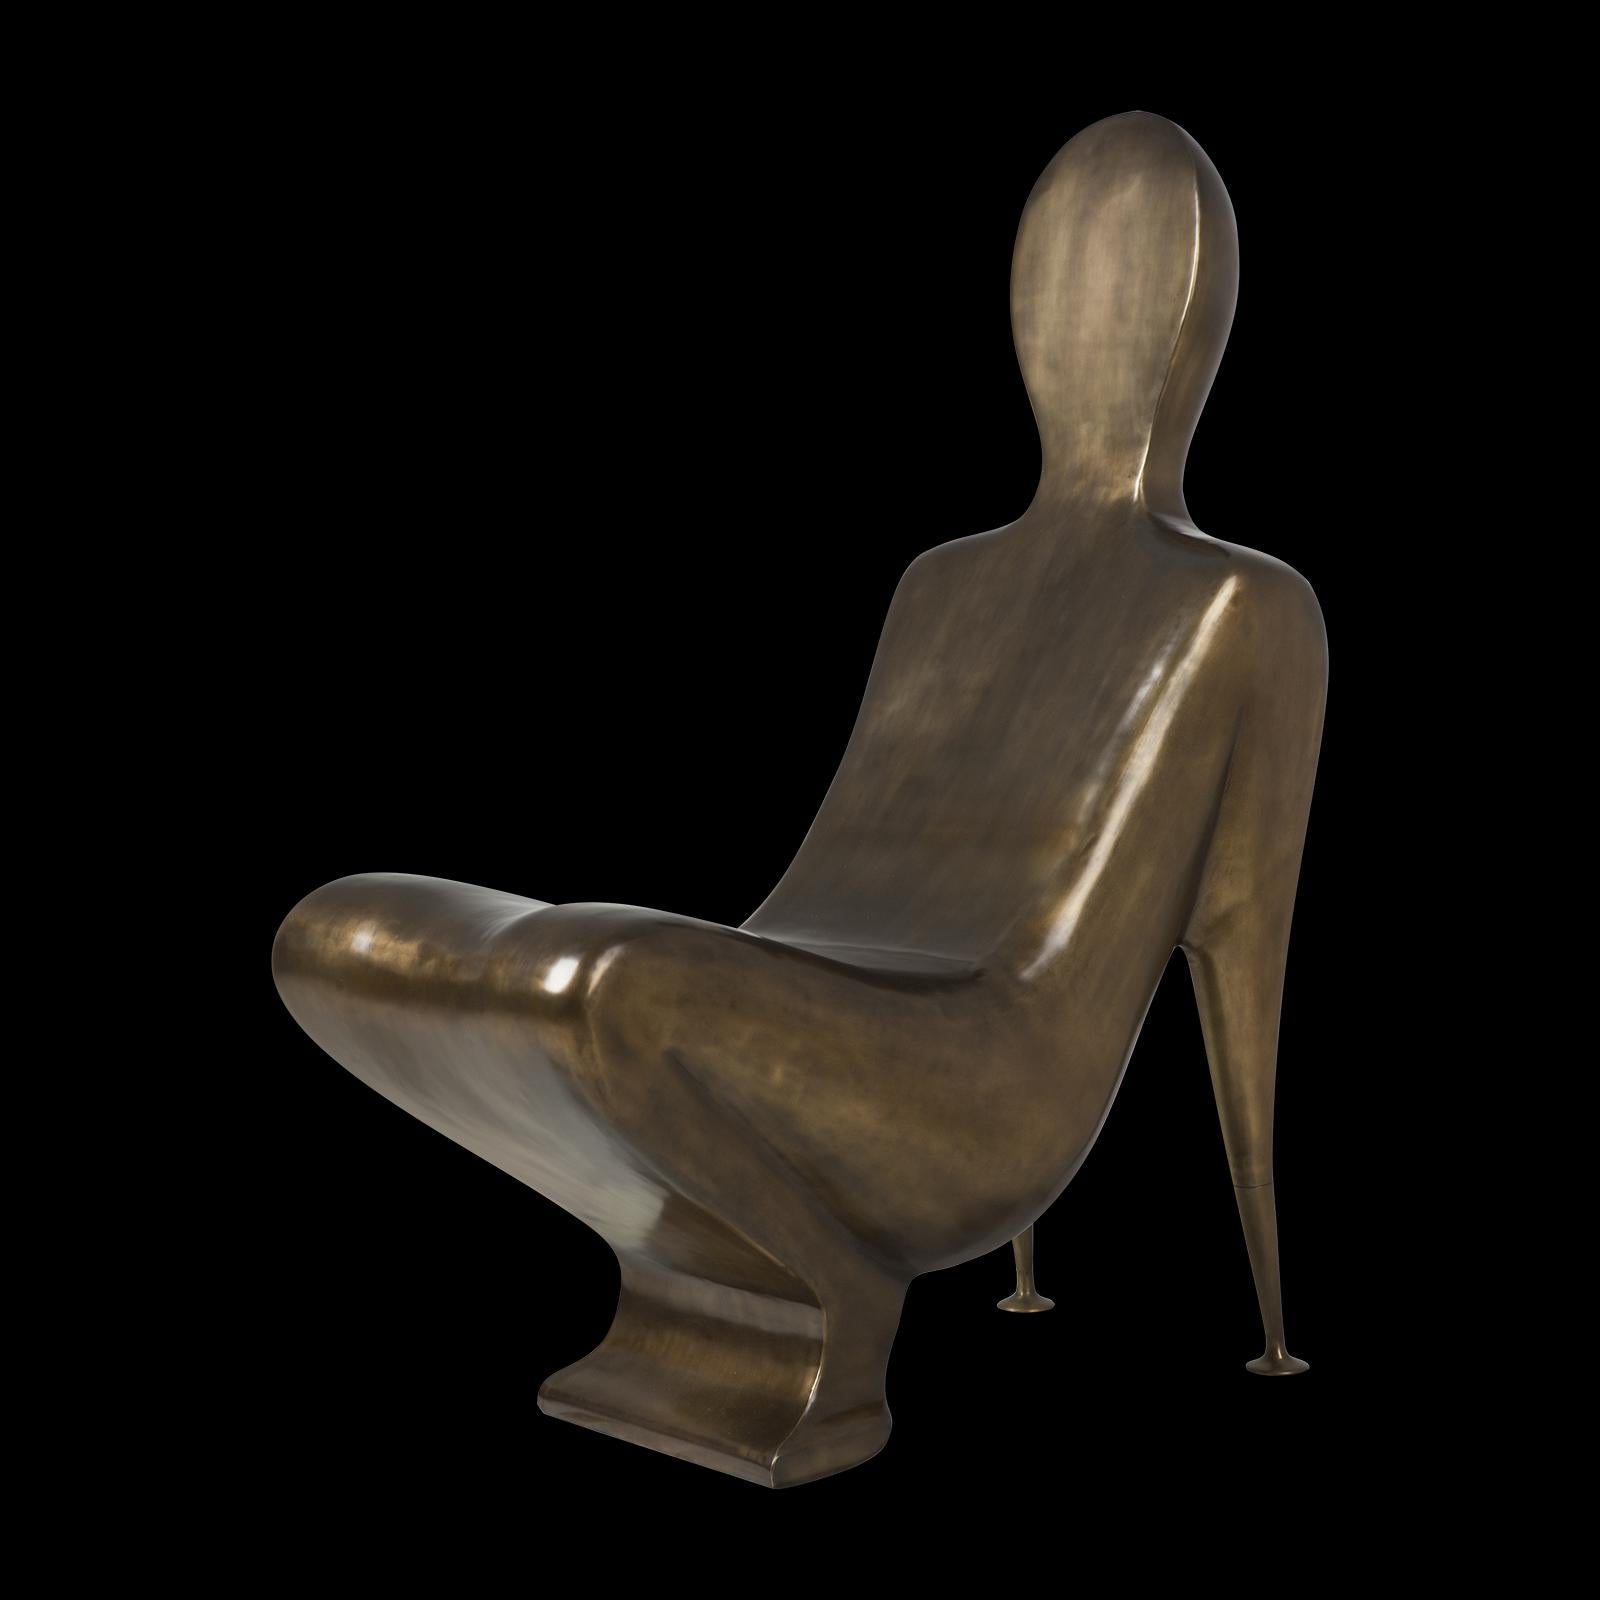 Chair human in solid brass in antique
finish. Hand beaten solid brass.